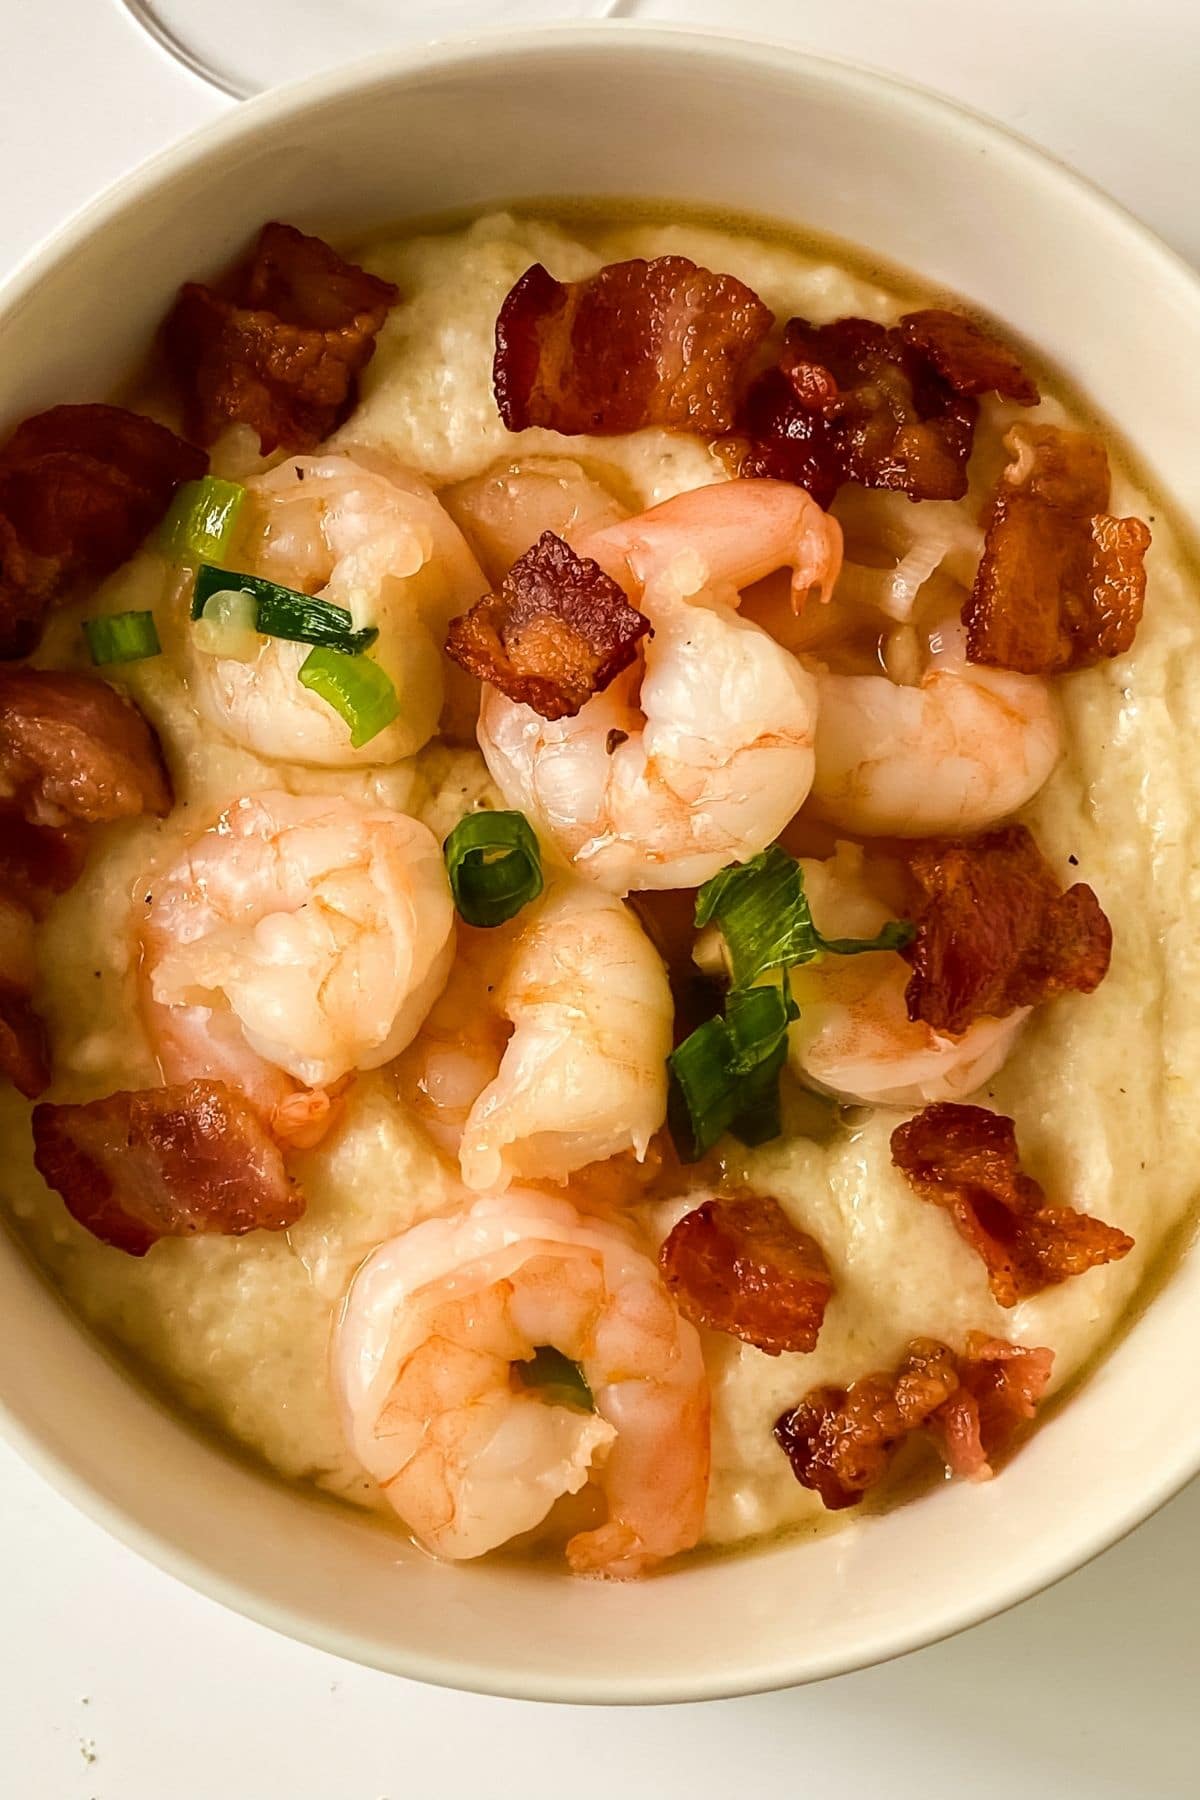 large cream bowl of grits topped with cooked shrimp and bacon